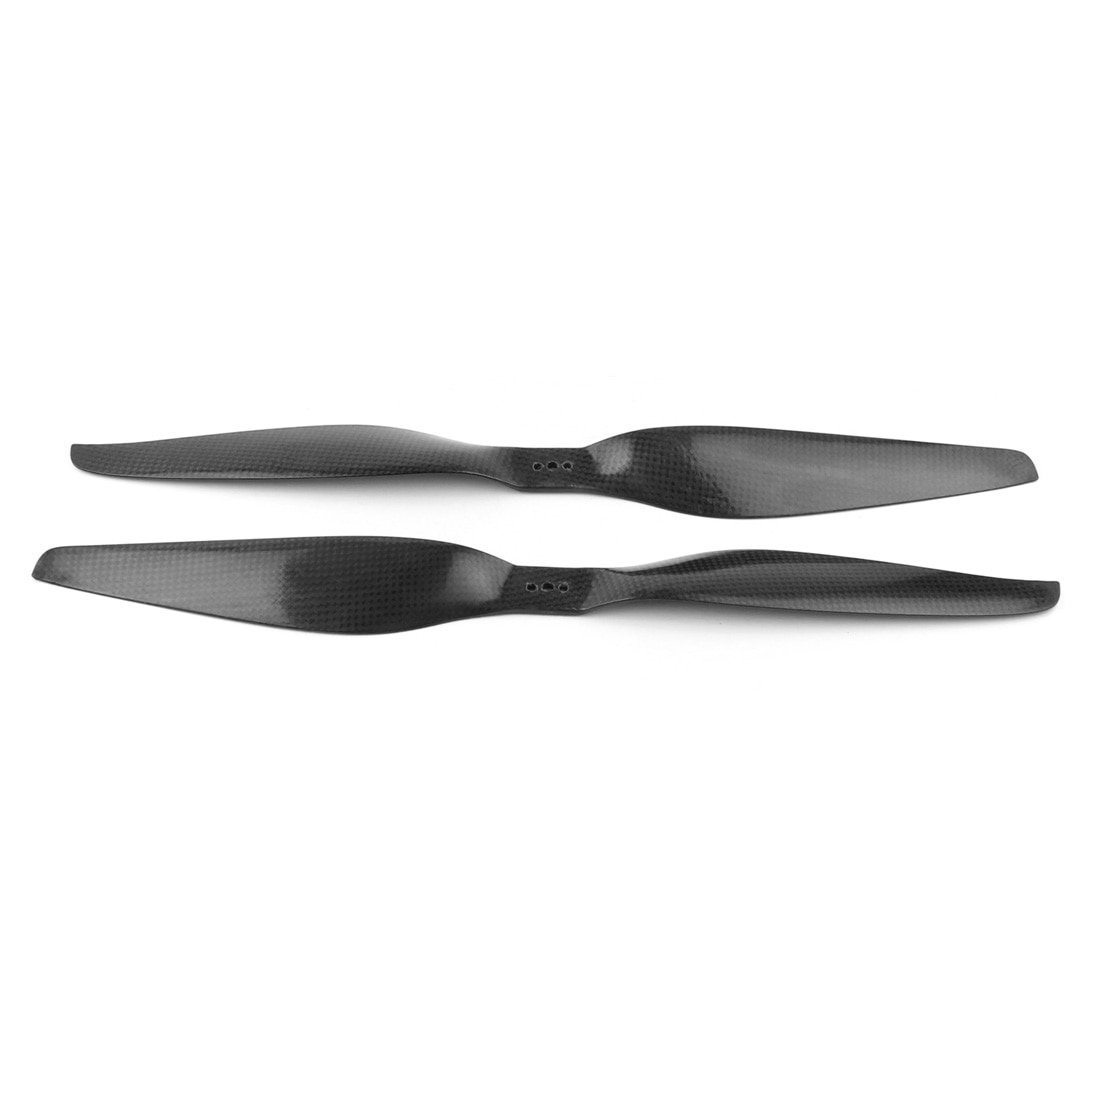 F06794 tre-hullers kulfiber 15 x 5.5 1555 propeller cw ccw prop til tiger multicopter rc fly fpv